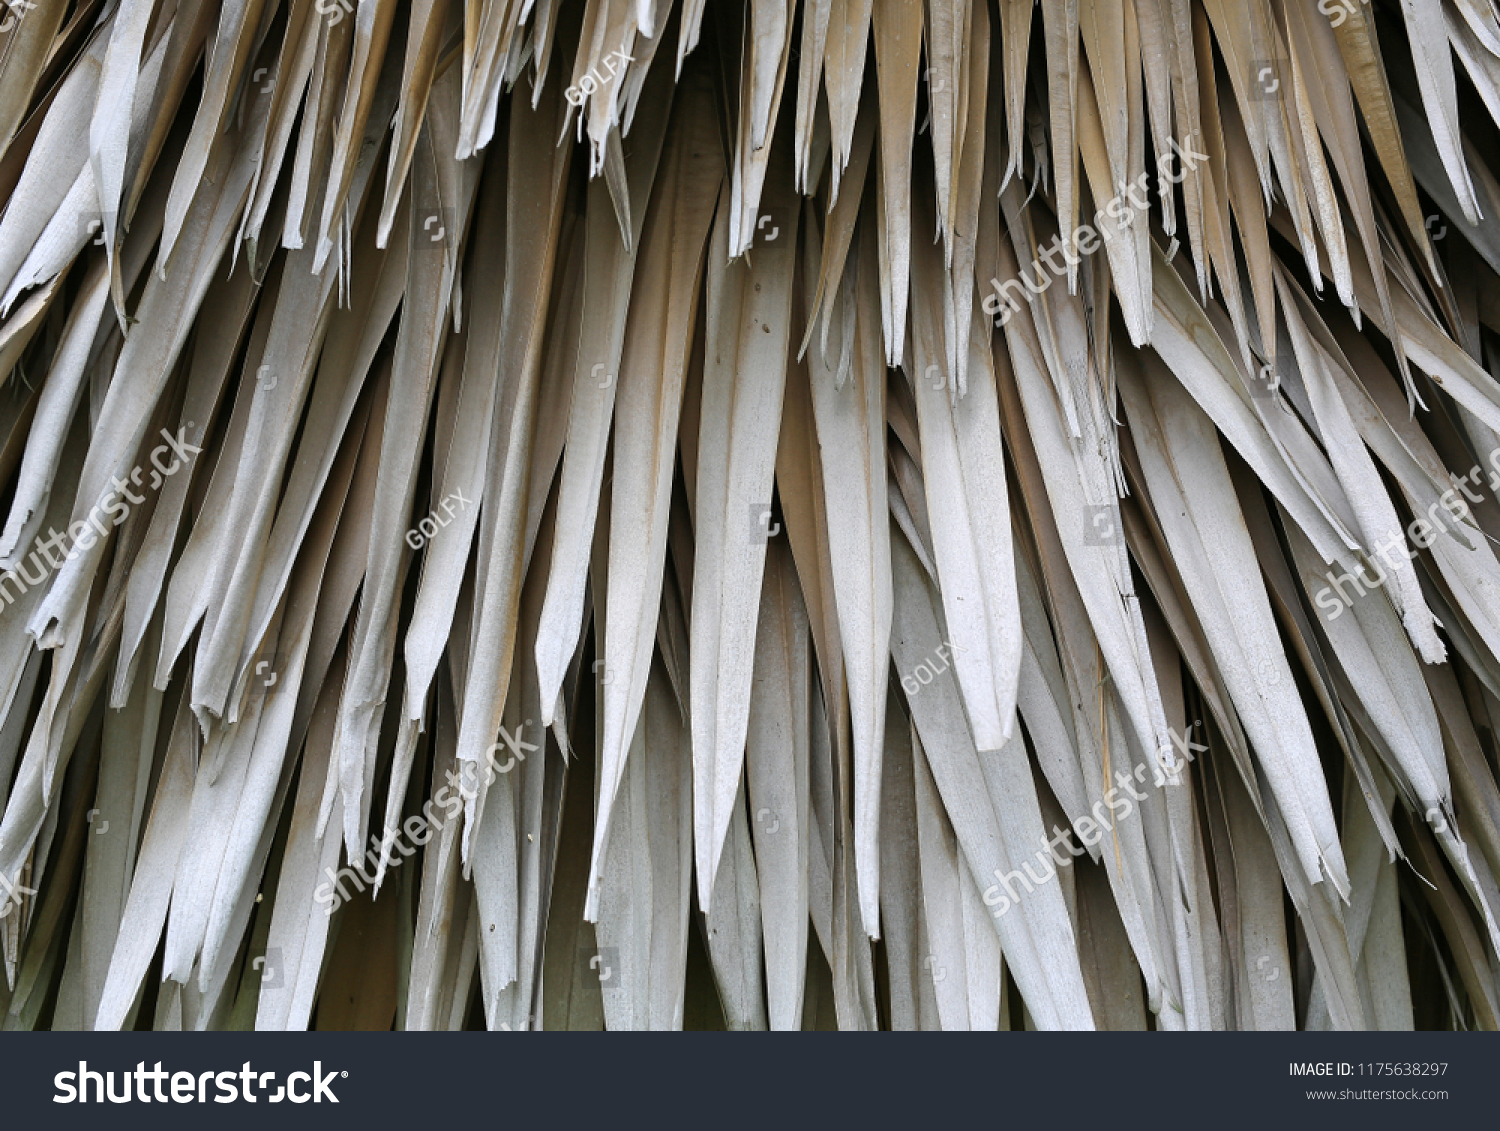 Jungle background of dead palm fronds overlapping layer of brown dry leaves. #1175638297